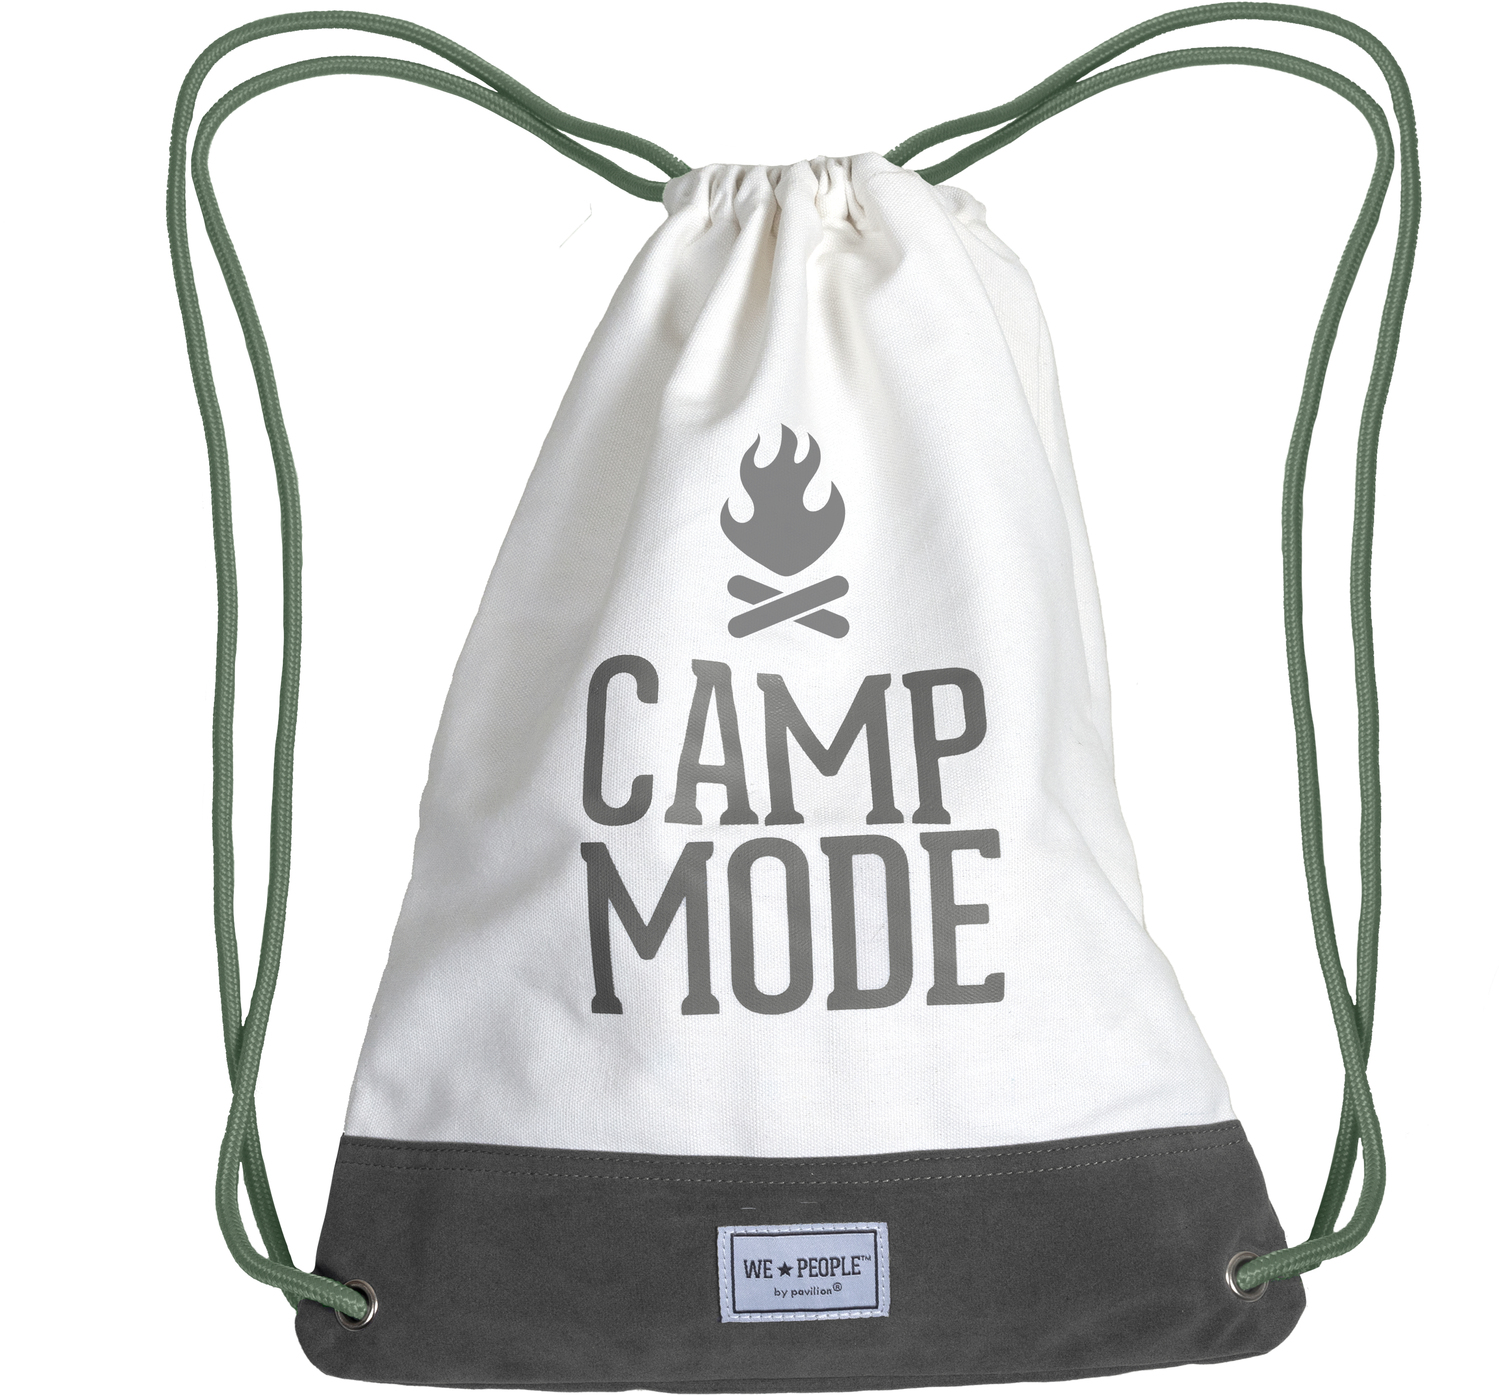 Camp Mode by We People - Camp Mode - 13" x 17" Canvas Drawstring Bag